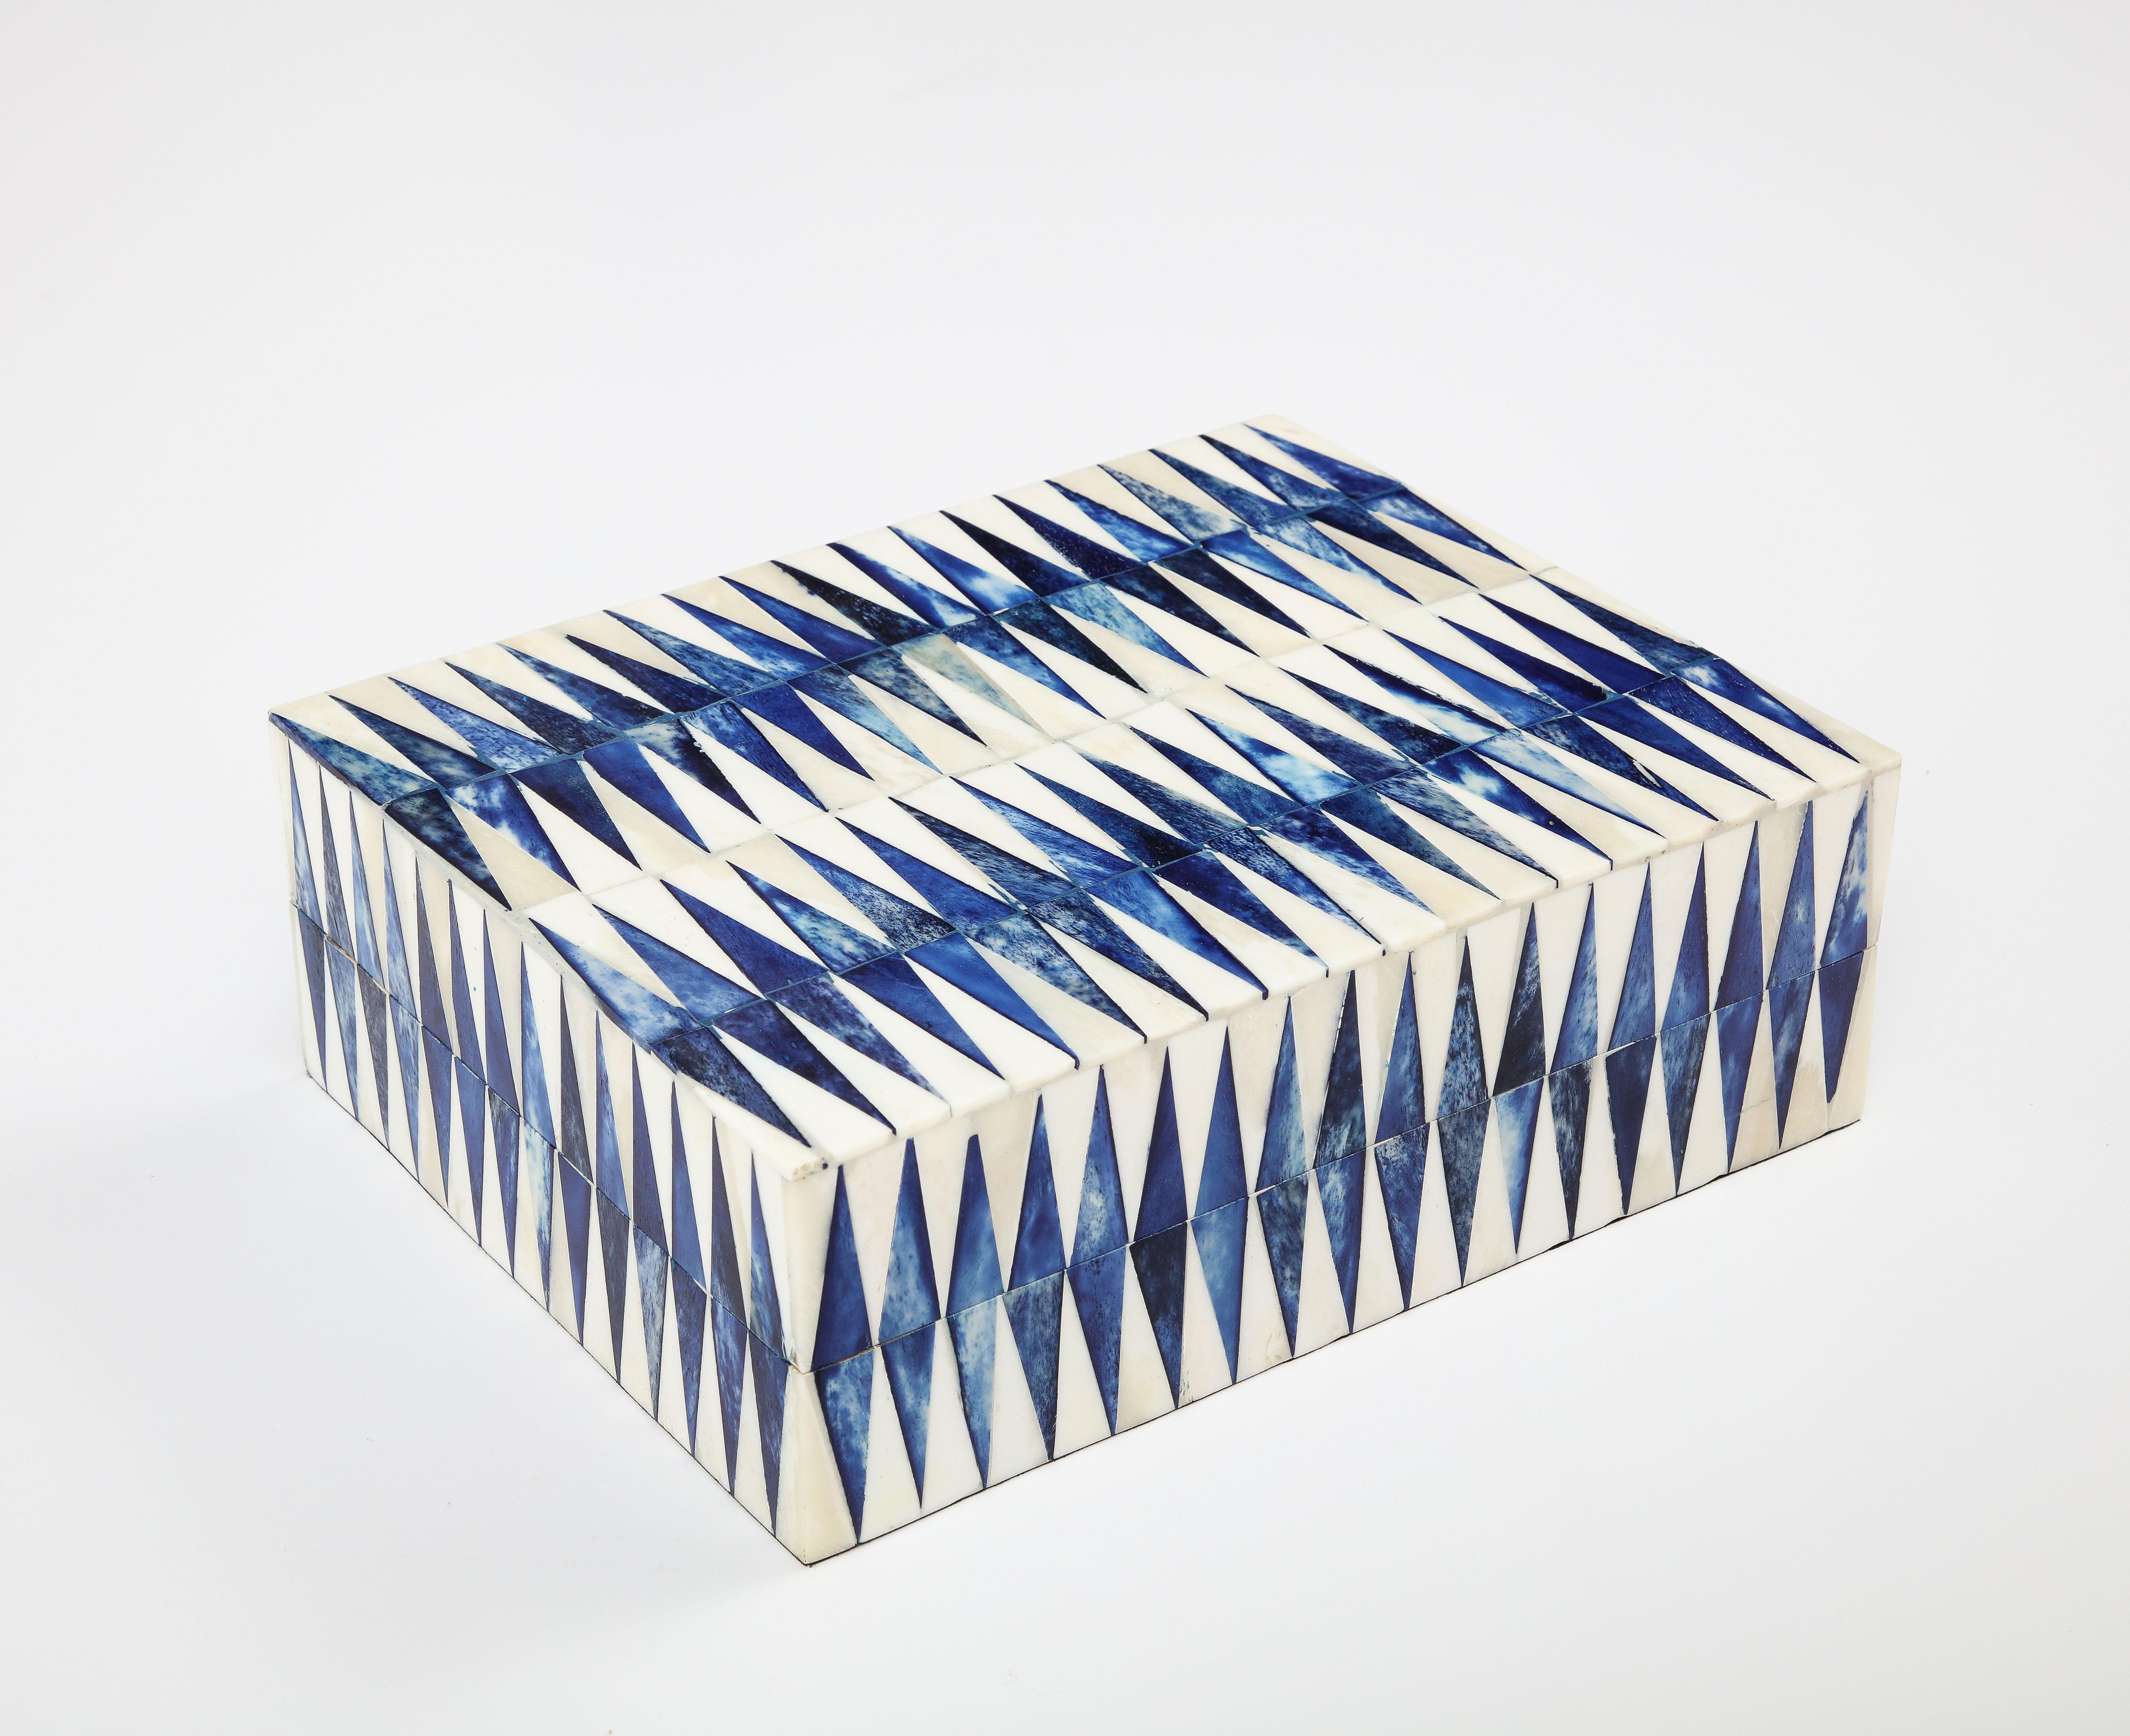 Graphic patterned keepsake box clad in natural and ink blue dyed bone. Tiles are hand set on a wood box.